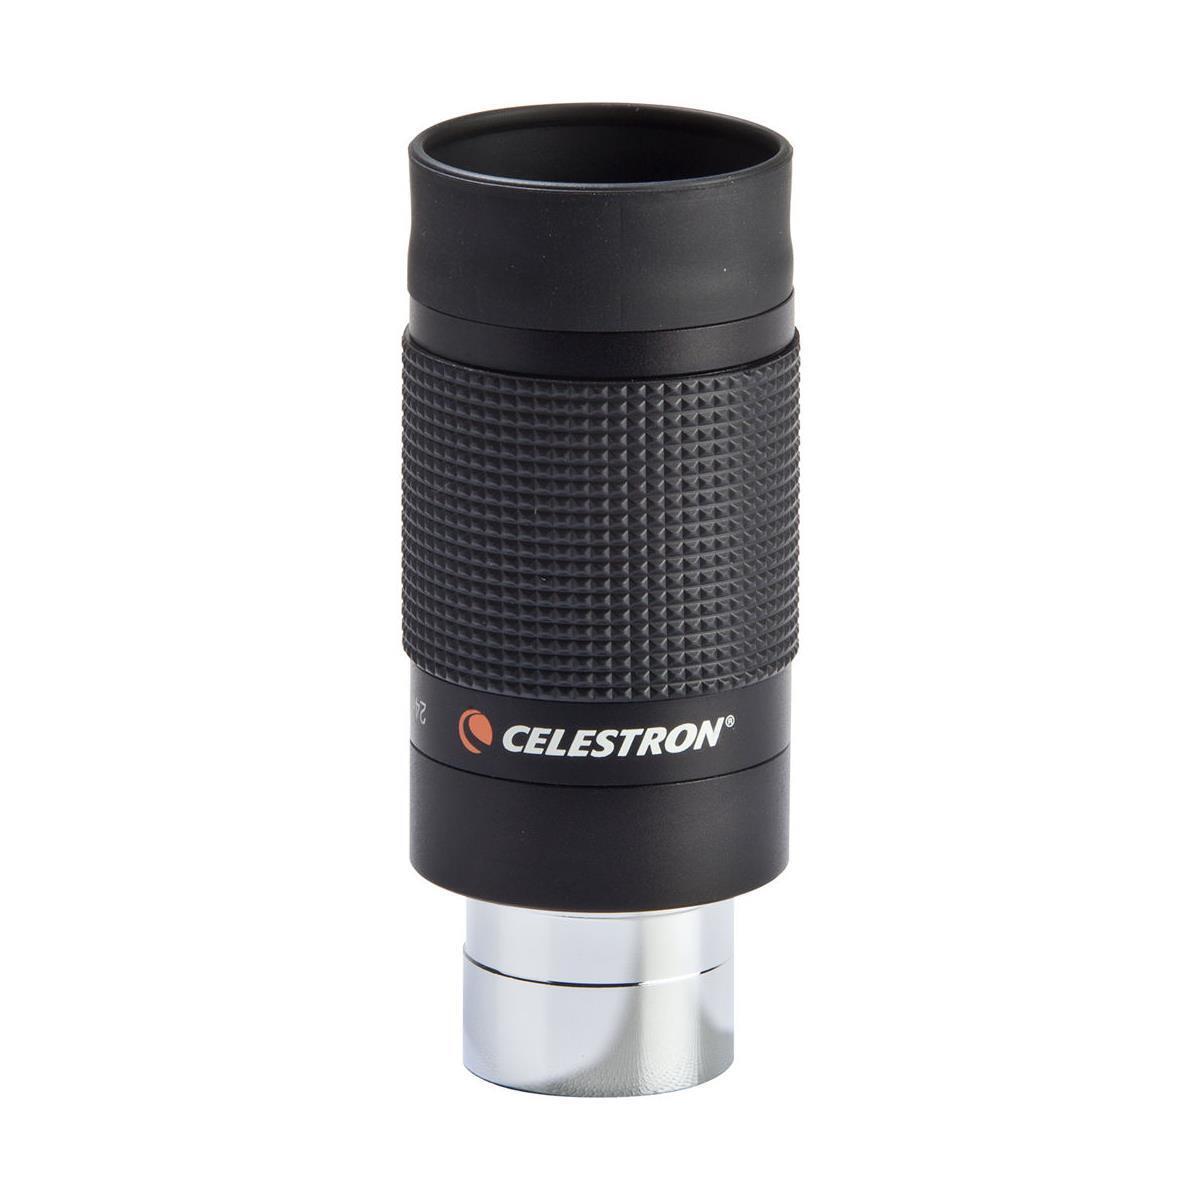 Celestron 8-24mm Eyepiece With 1-1/4" Mount #93230